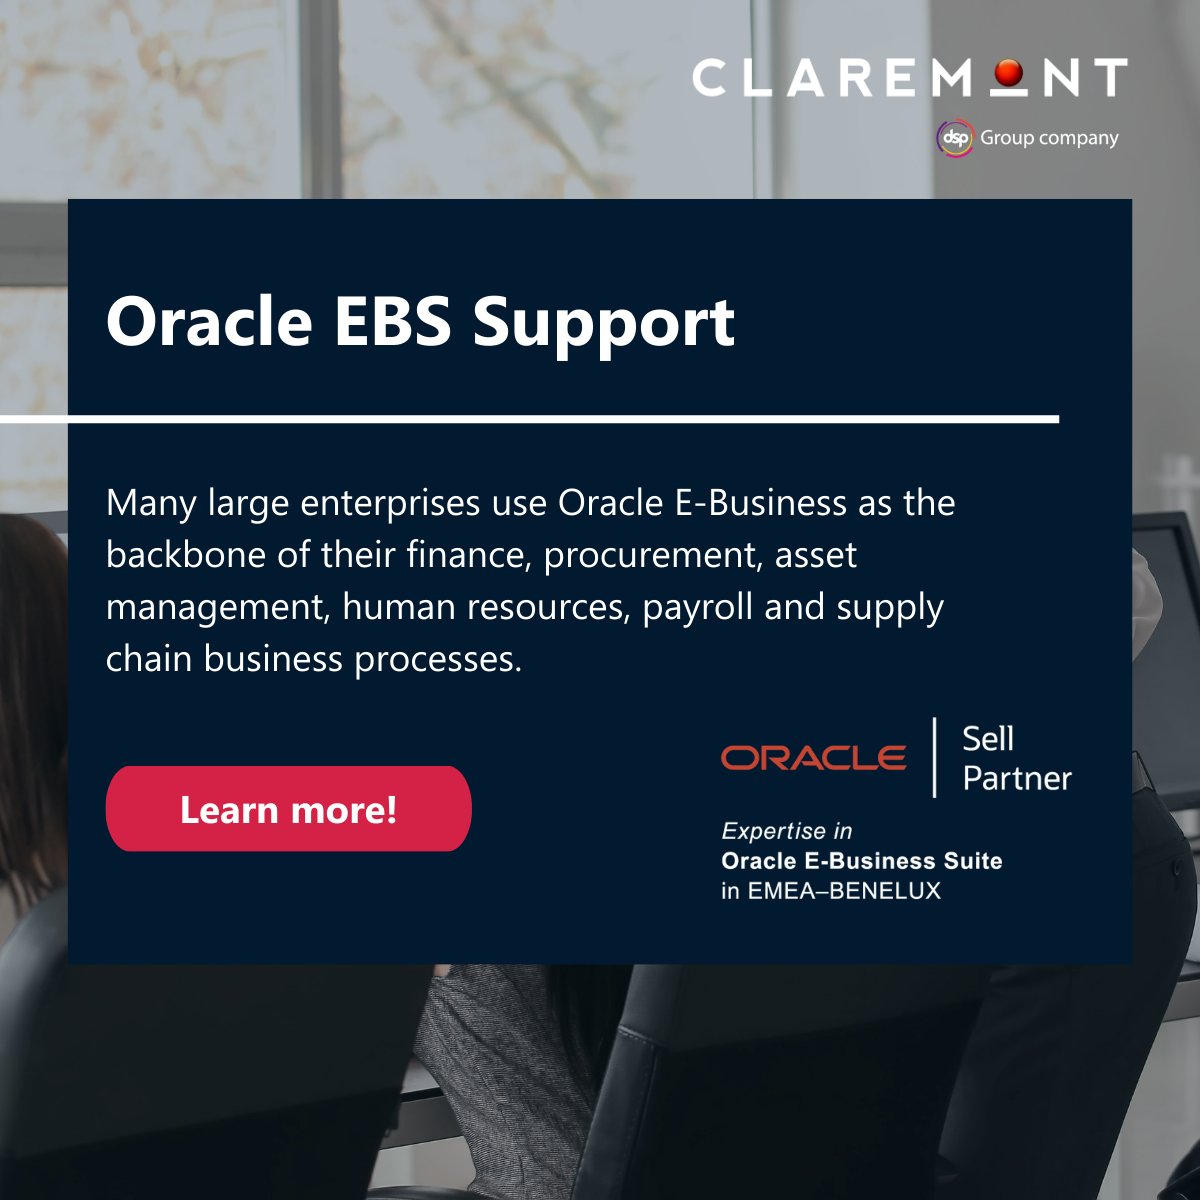 Ensure your Oracle EBS is always running at peak performance with our support services. We specialise in Oracle EBS services, offering managed services, Cloud migrations, and implementing new modules or business structures. Discover more: bit.ly/3Vgzd5z 

#OracleEBS #EBS